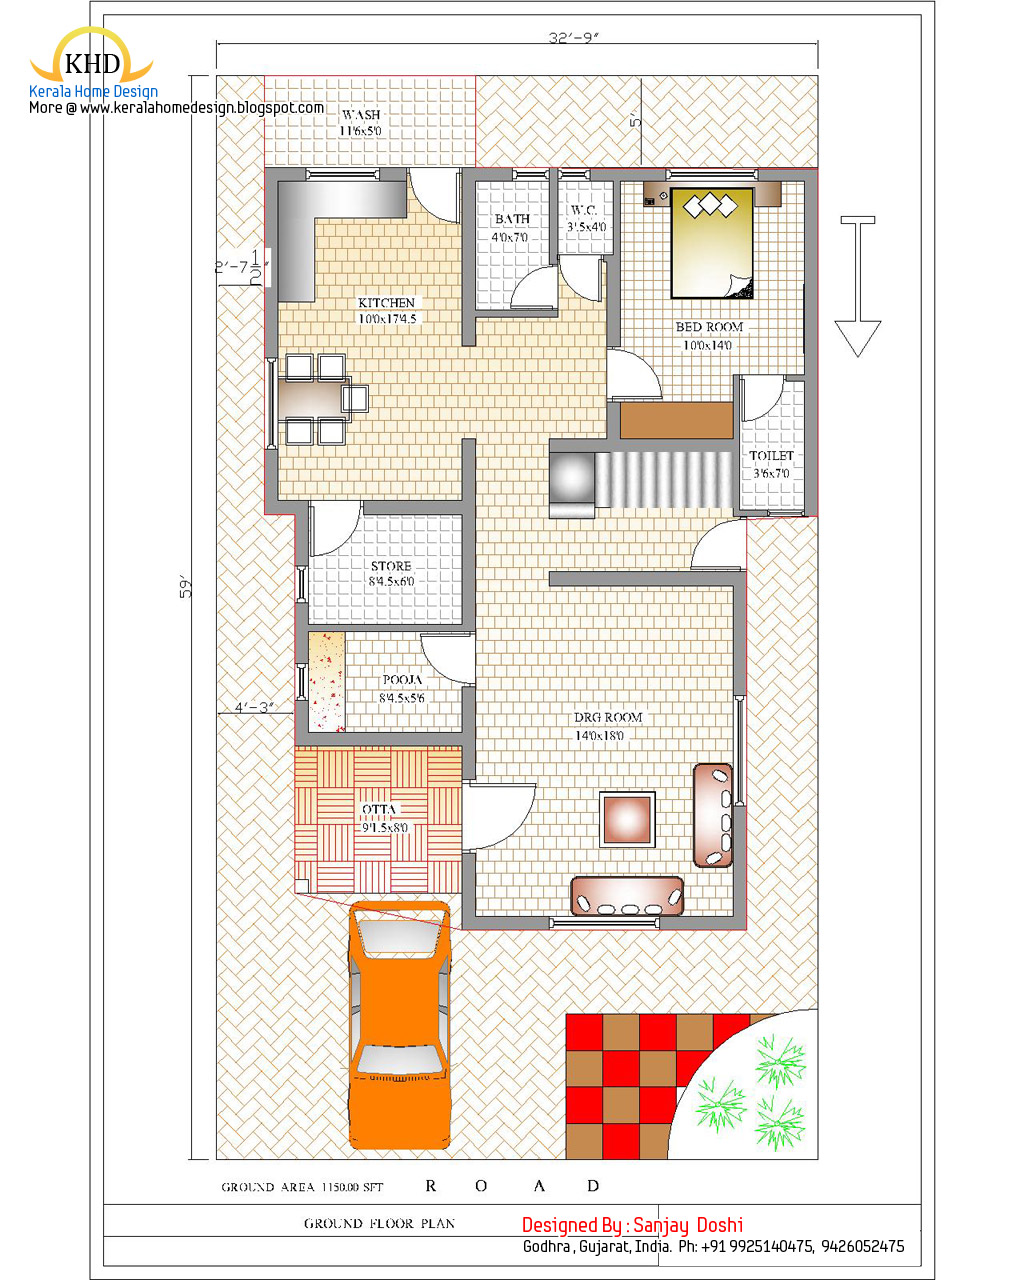 Duplex House Plan And Elevation 2310 Sq Ft Kerala Home Design And Floor Plans 8000 Houses